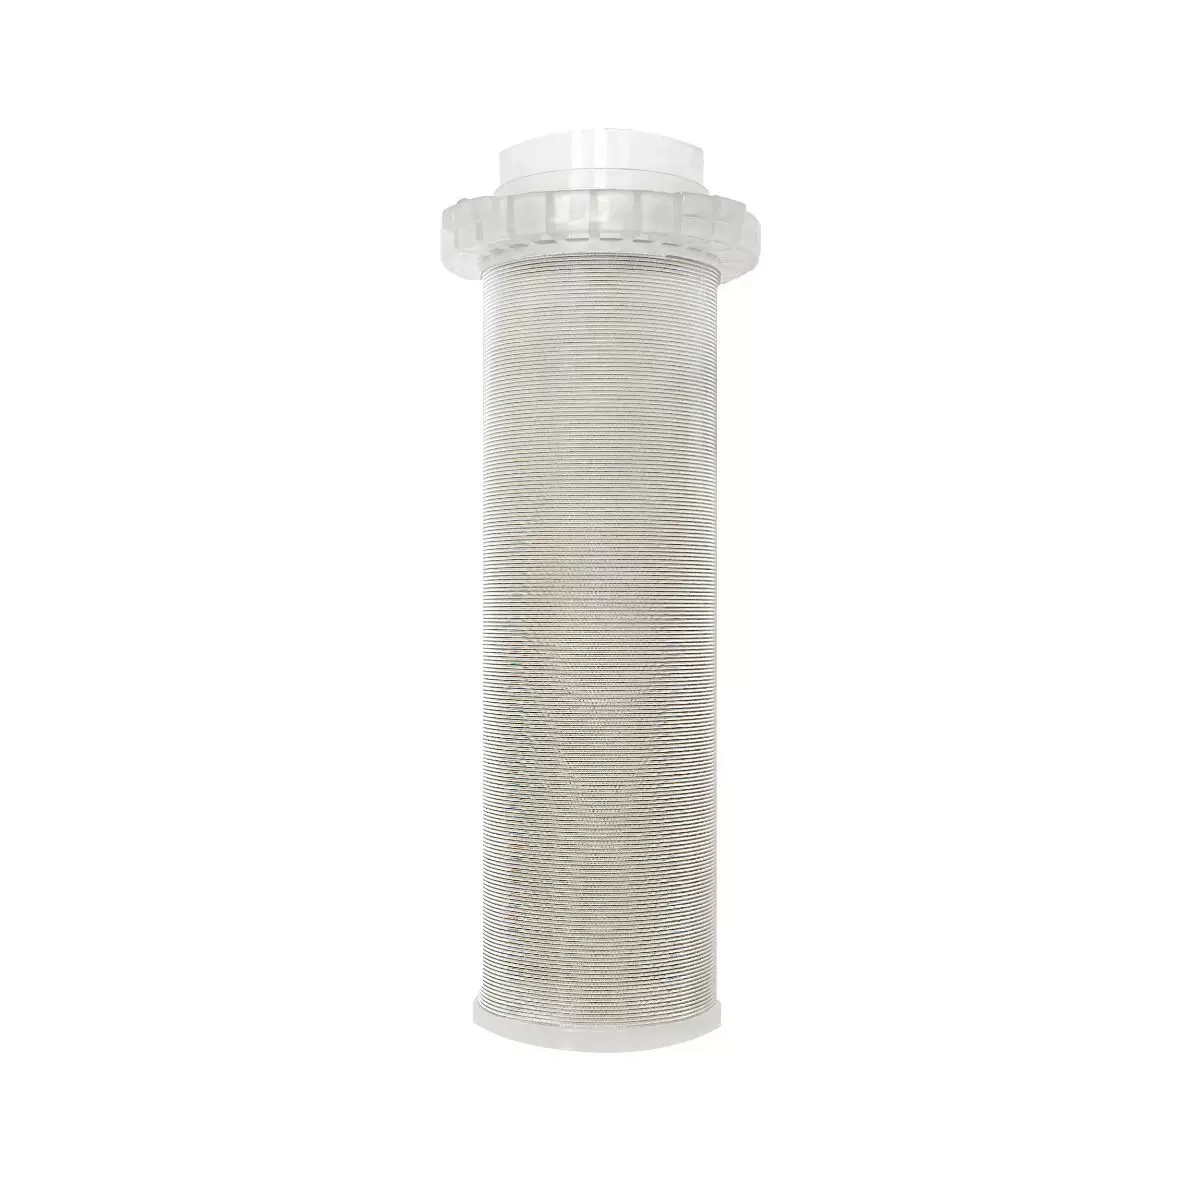 Replacement Cartridge For Aquaboon Spin Down Sediment Water Pre Filter, 500 Micron